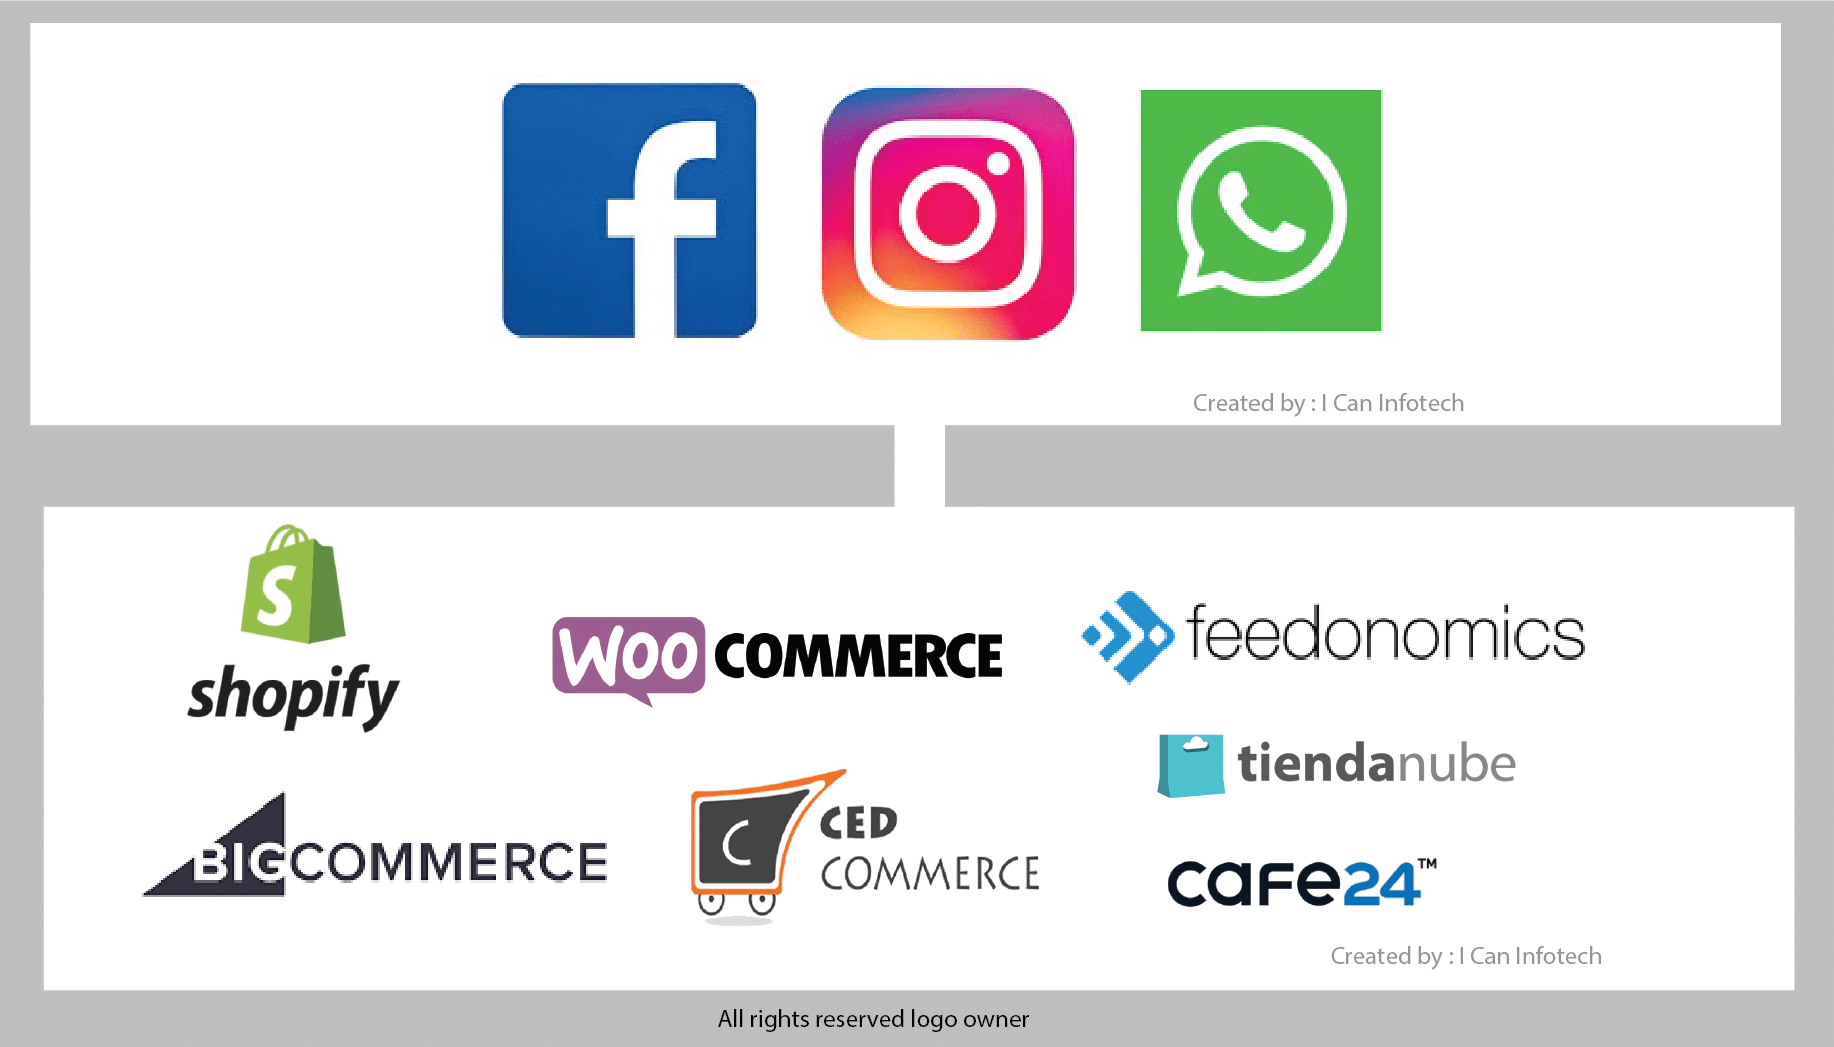 facebook and instagram and whats app shops